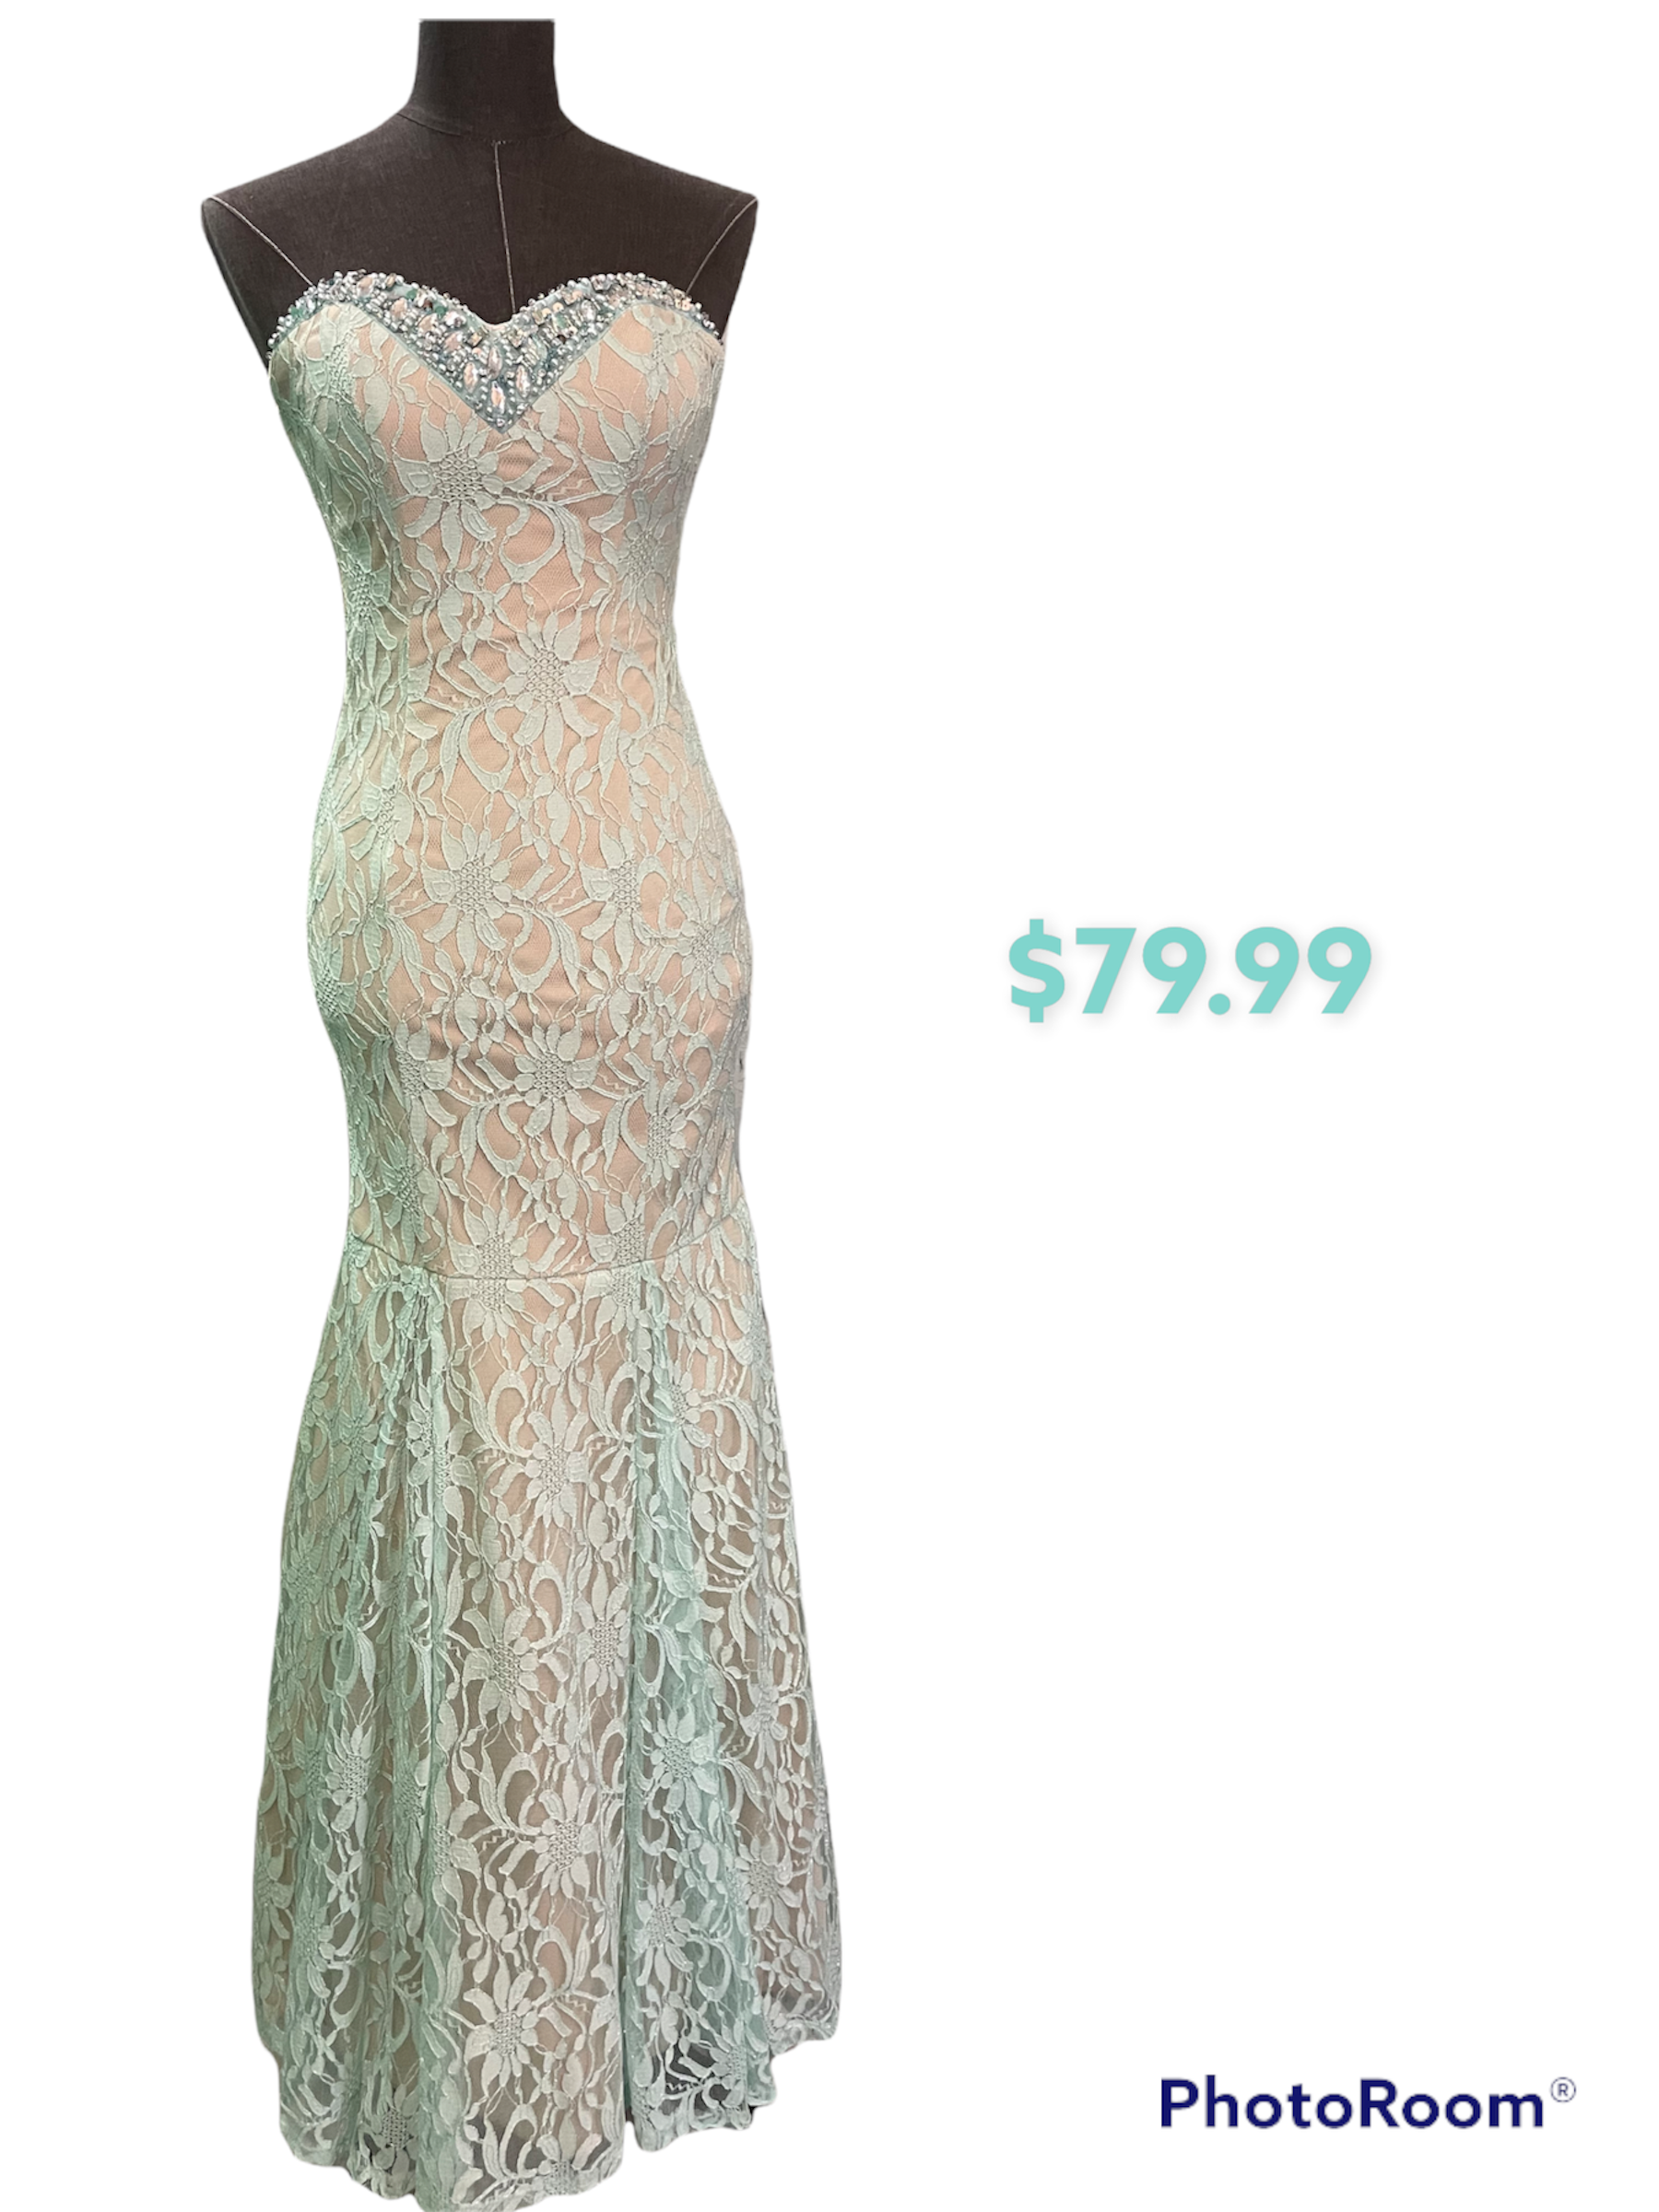 Sequin Heart Lace Prom
MInt & flesh colored
Size: 5